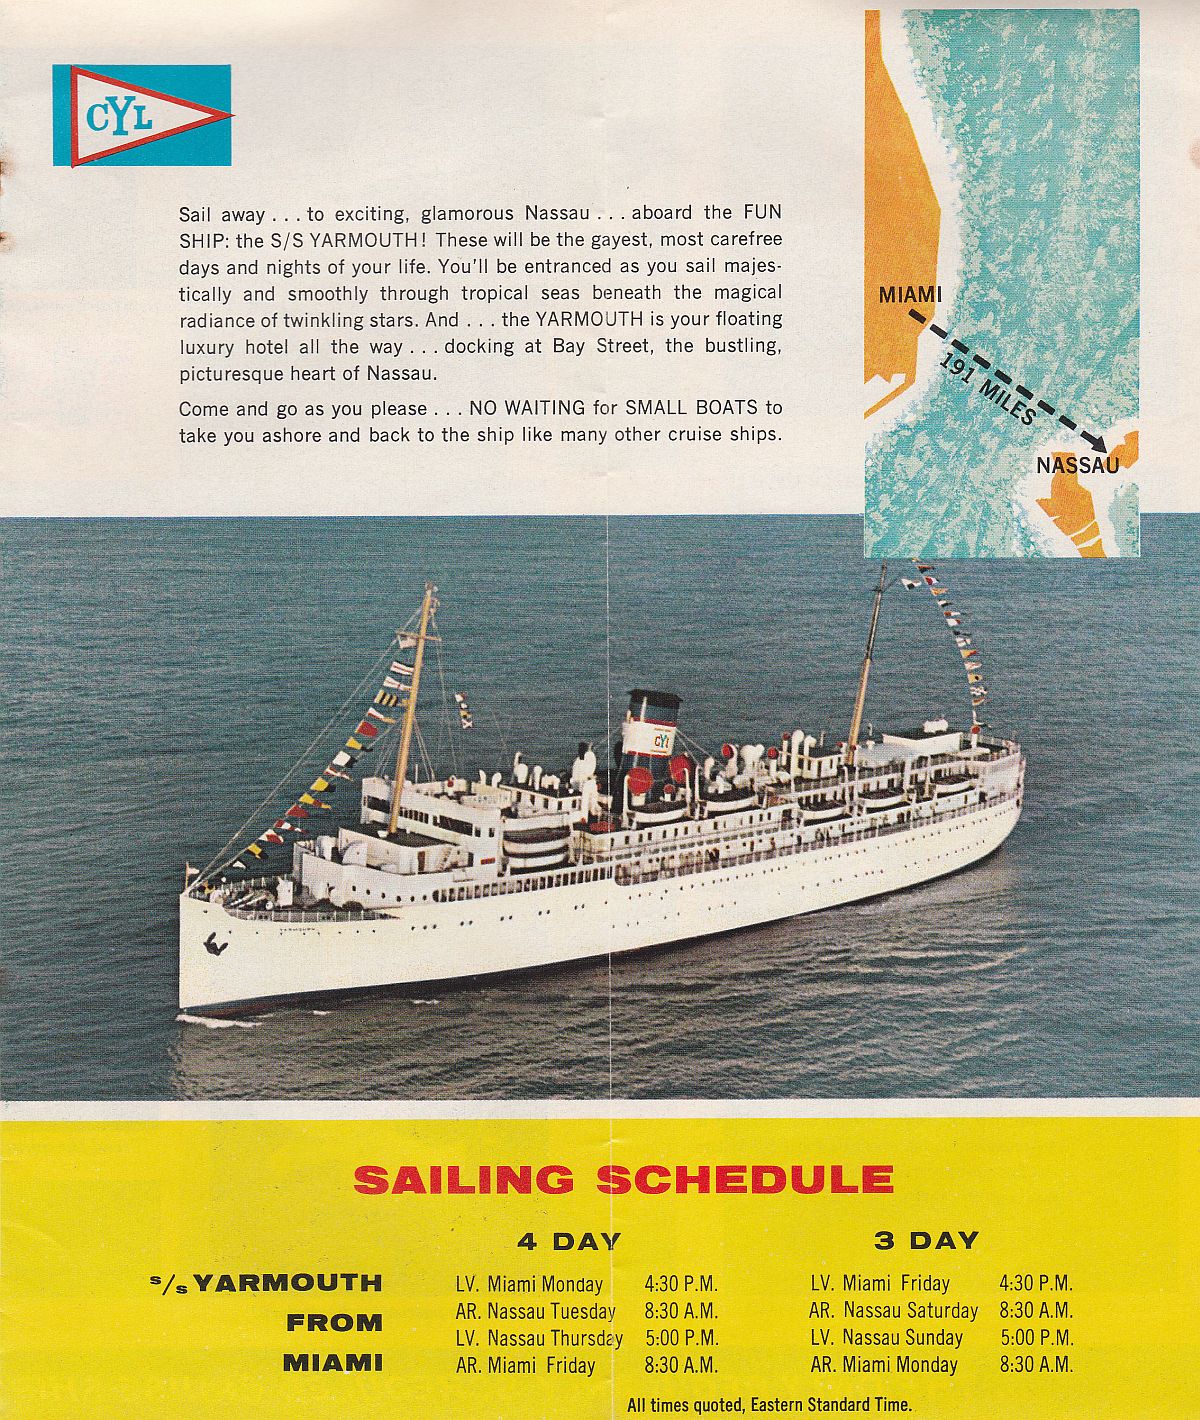 ss Yarmouth Map & sailing schedule: Sail away to exciting, glamorous Nassau aboard the FUN SHIP the s/s YARMOUTH!